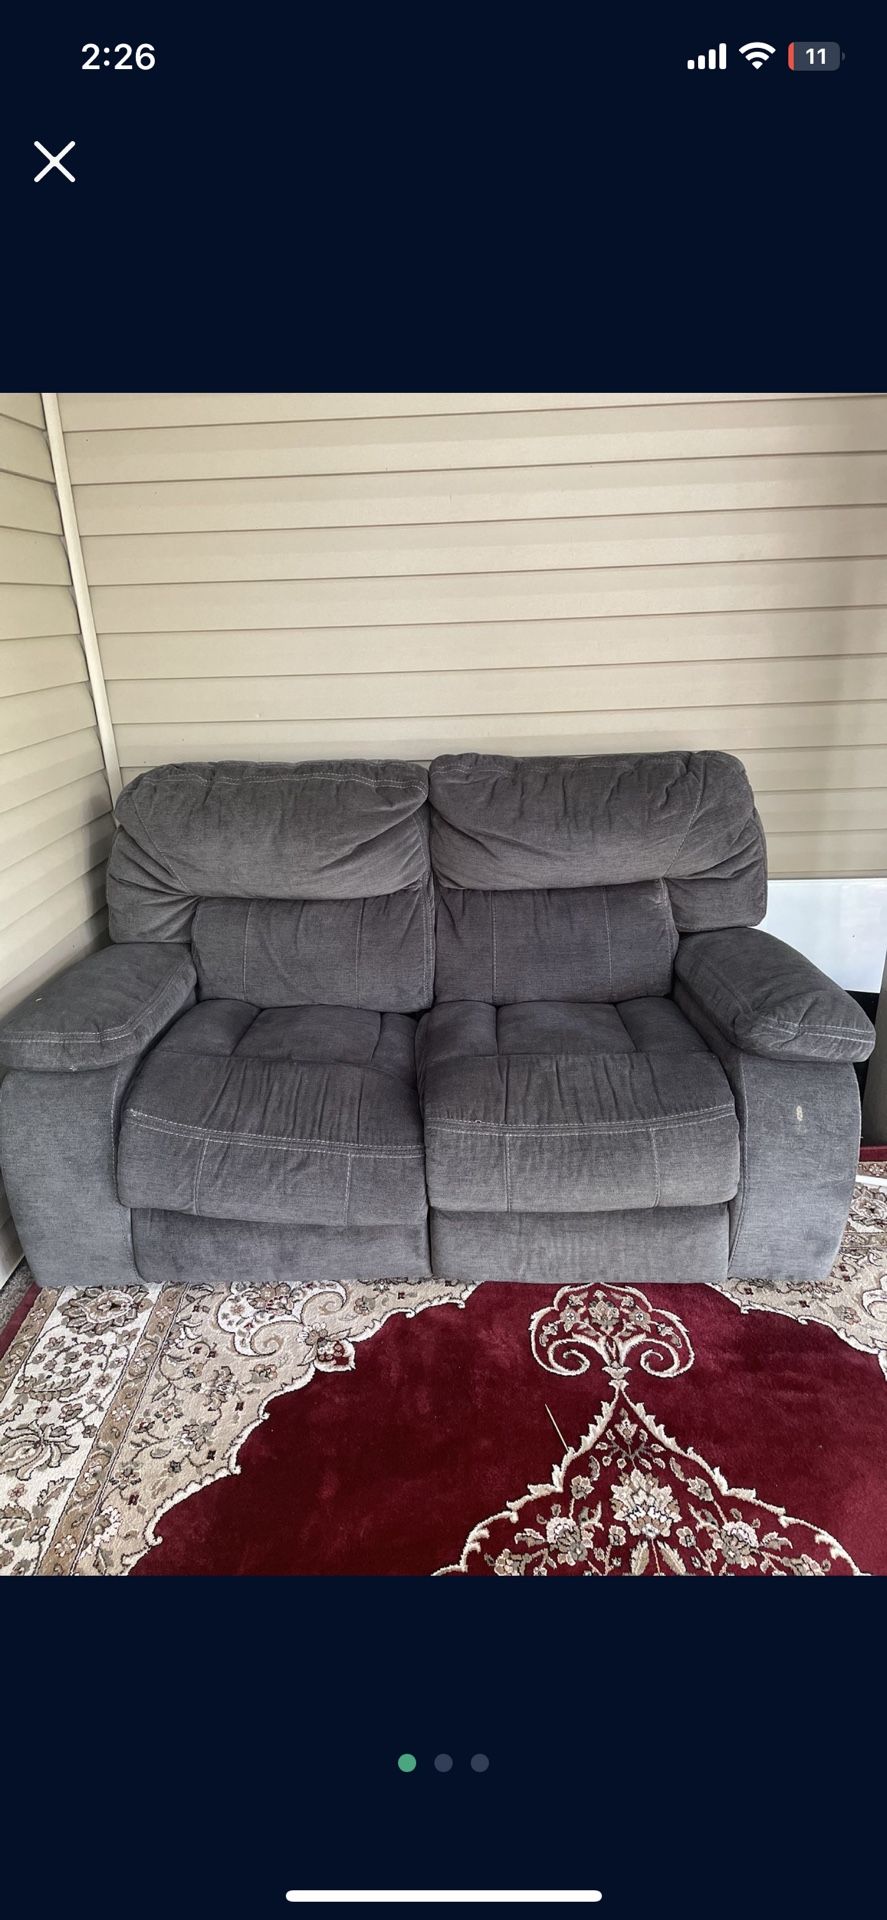 Reclining Gray Couch! NEED IT GONE ASAP 85$